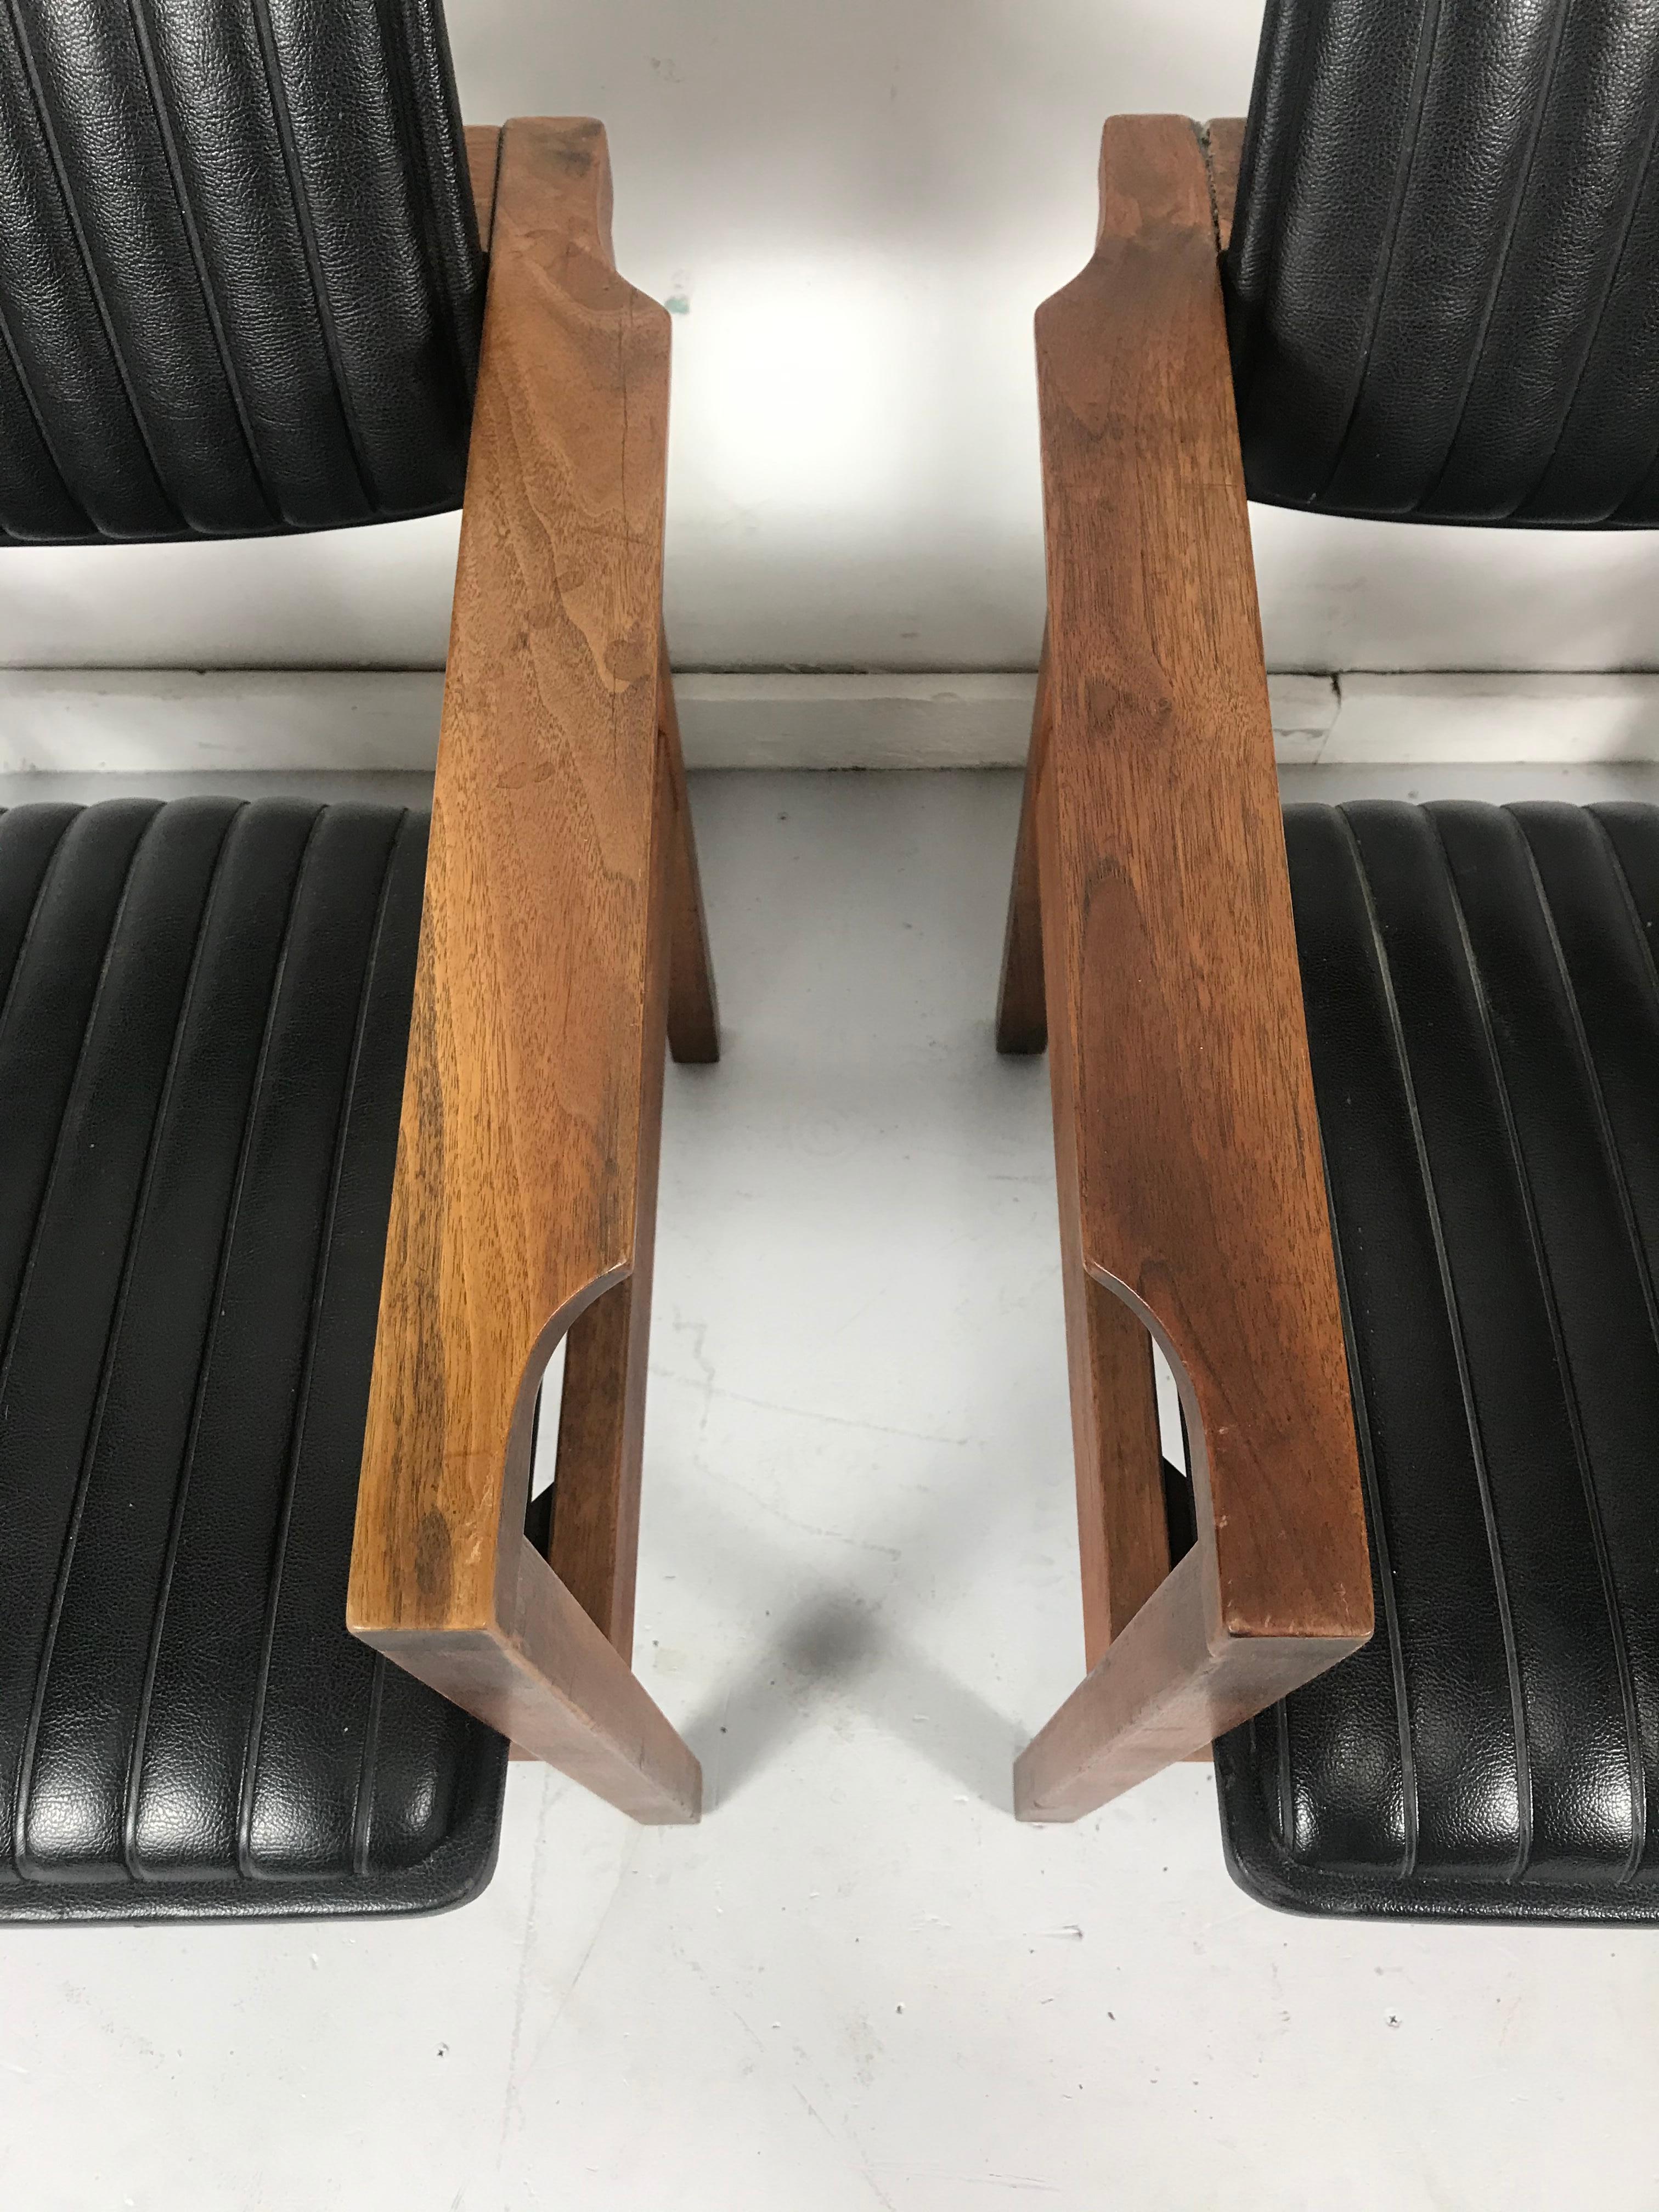 Pair of modernist walnut and channeled Naugahyde lounge chairs attributed to Jens Risom. Wonderful design. Channeled seats and backs similar to 1950s car interior seats. Extremely comfortable, Classic modernist design.